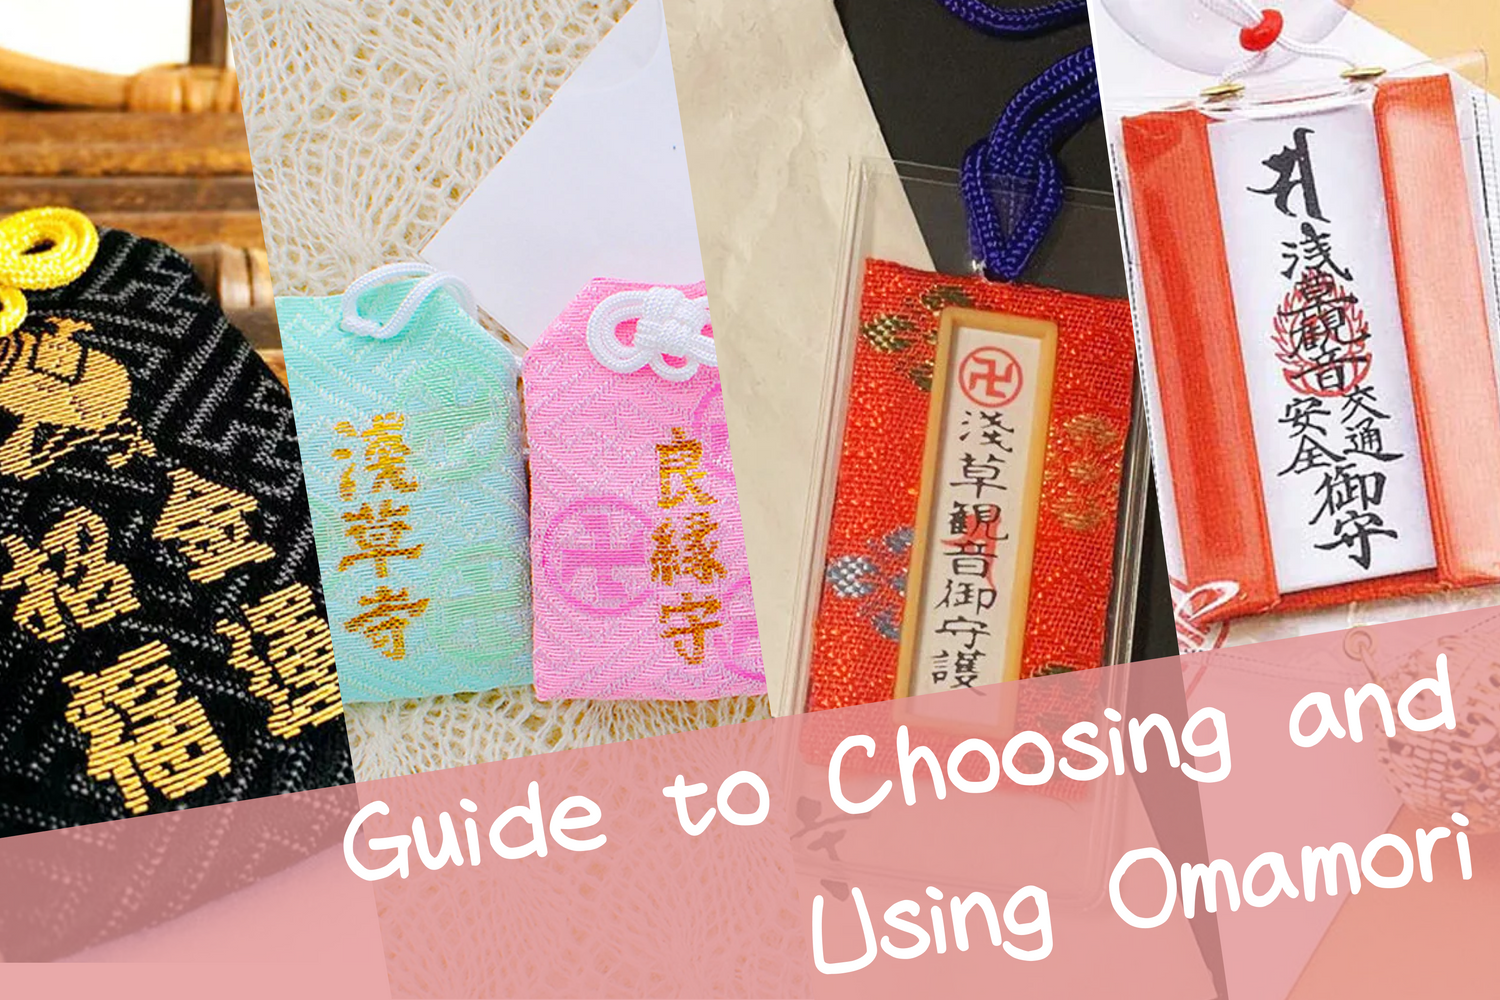 Omamori: Guide to Choosing and Using Japan’s Lucky Charm